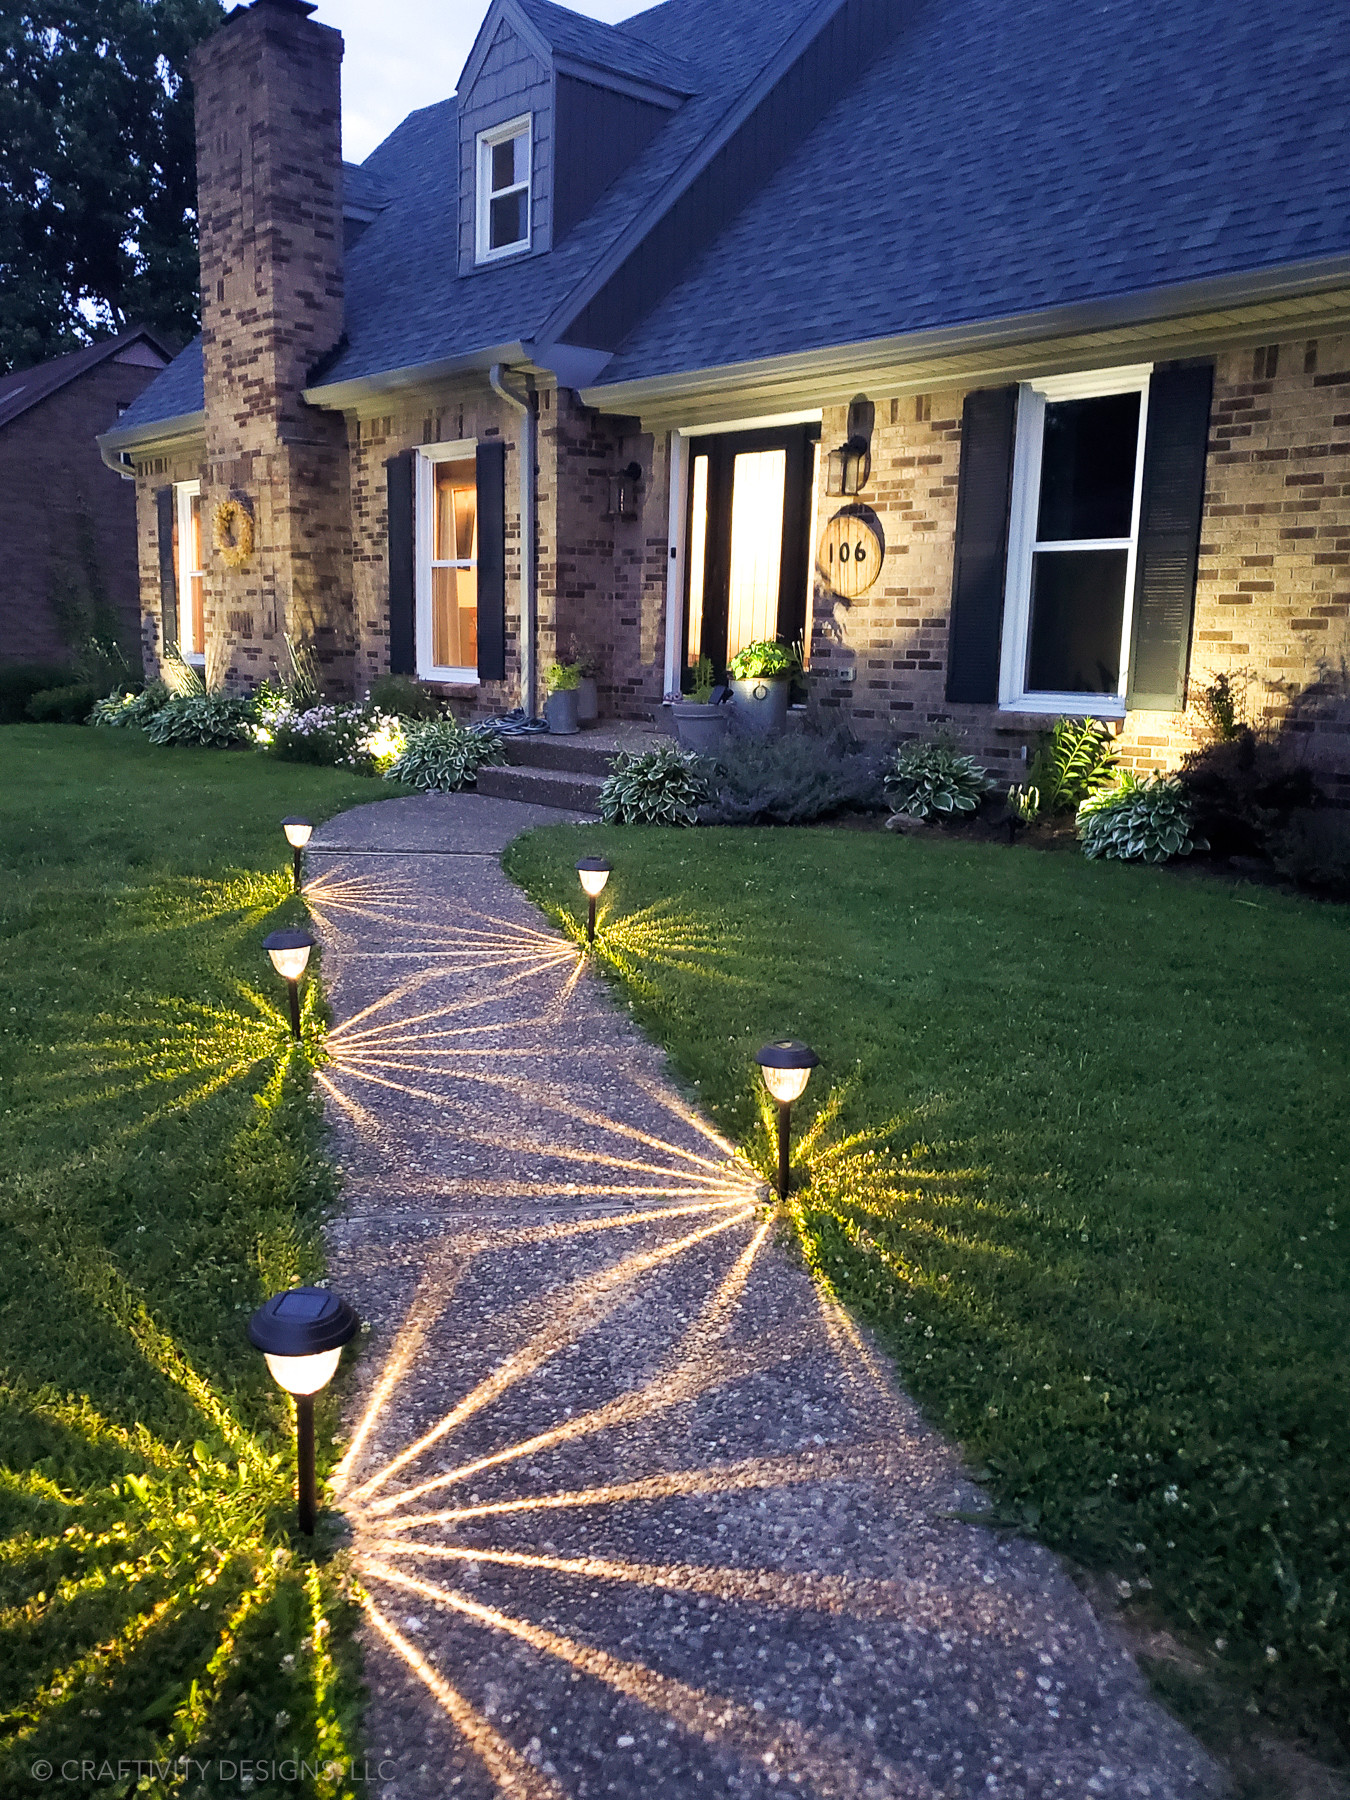 Solar Landscape Lighting Ideas to Highlight your Home